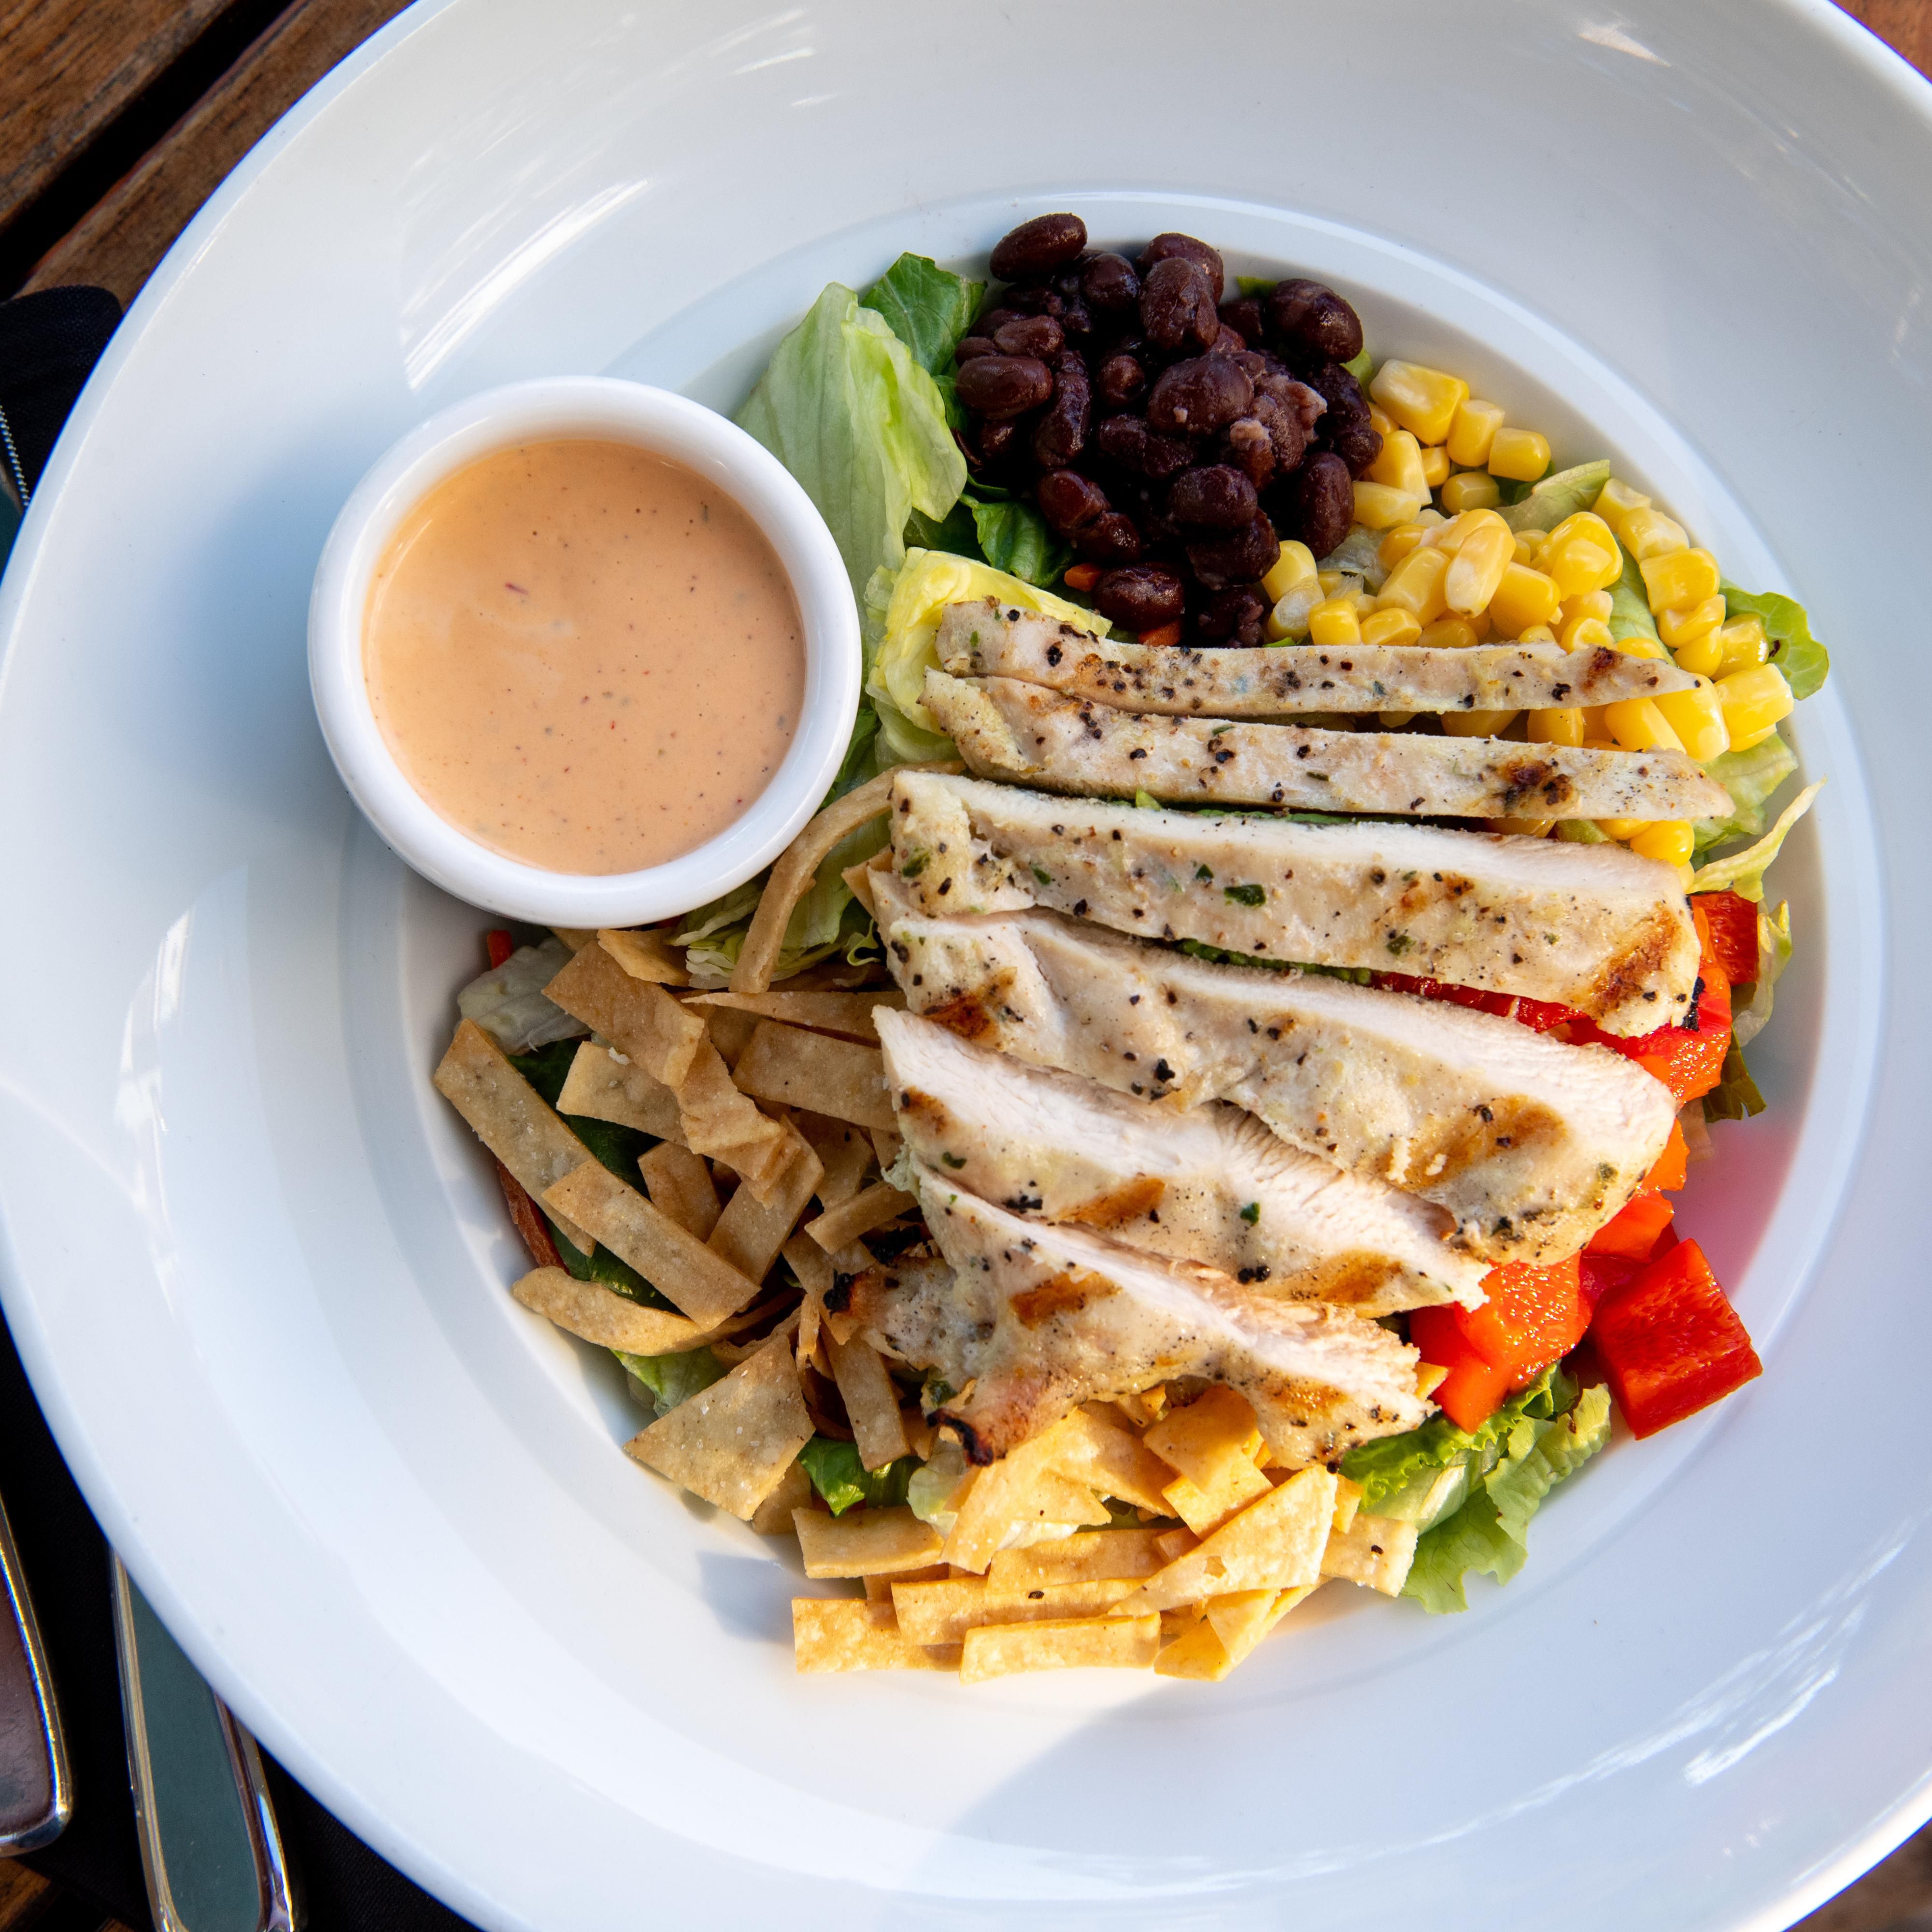 Southwest grilled chicken salad from 4290 Bistro and Bar.